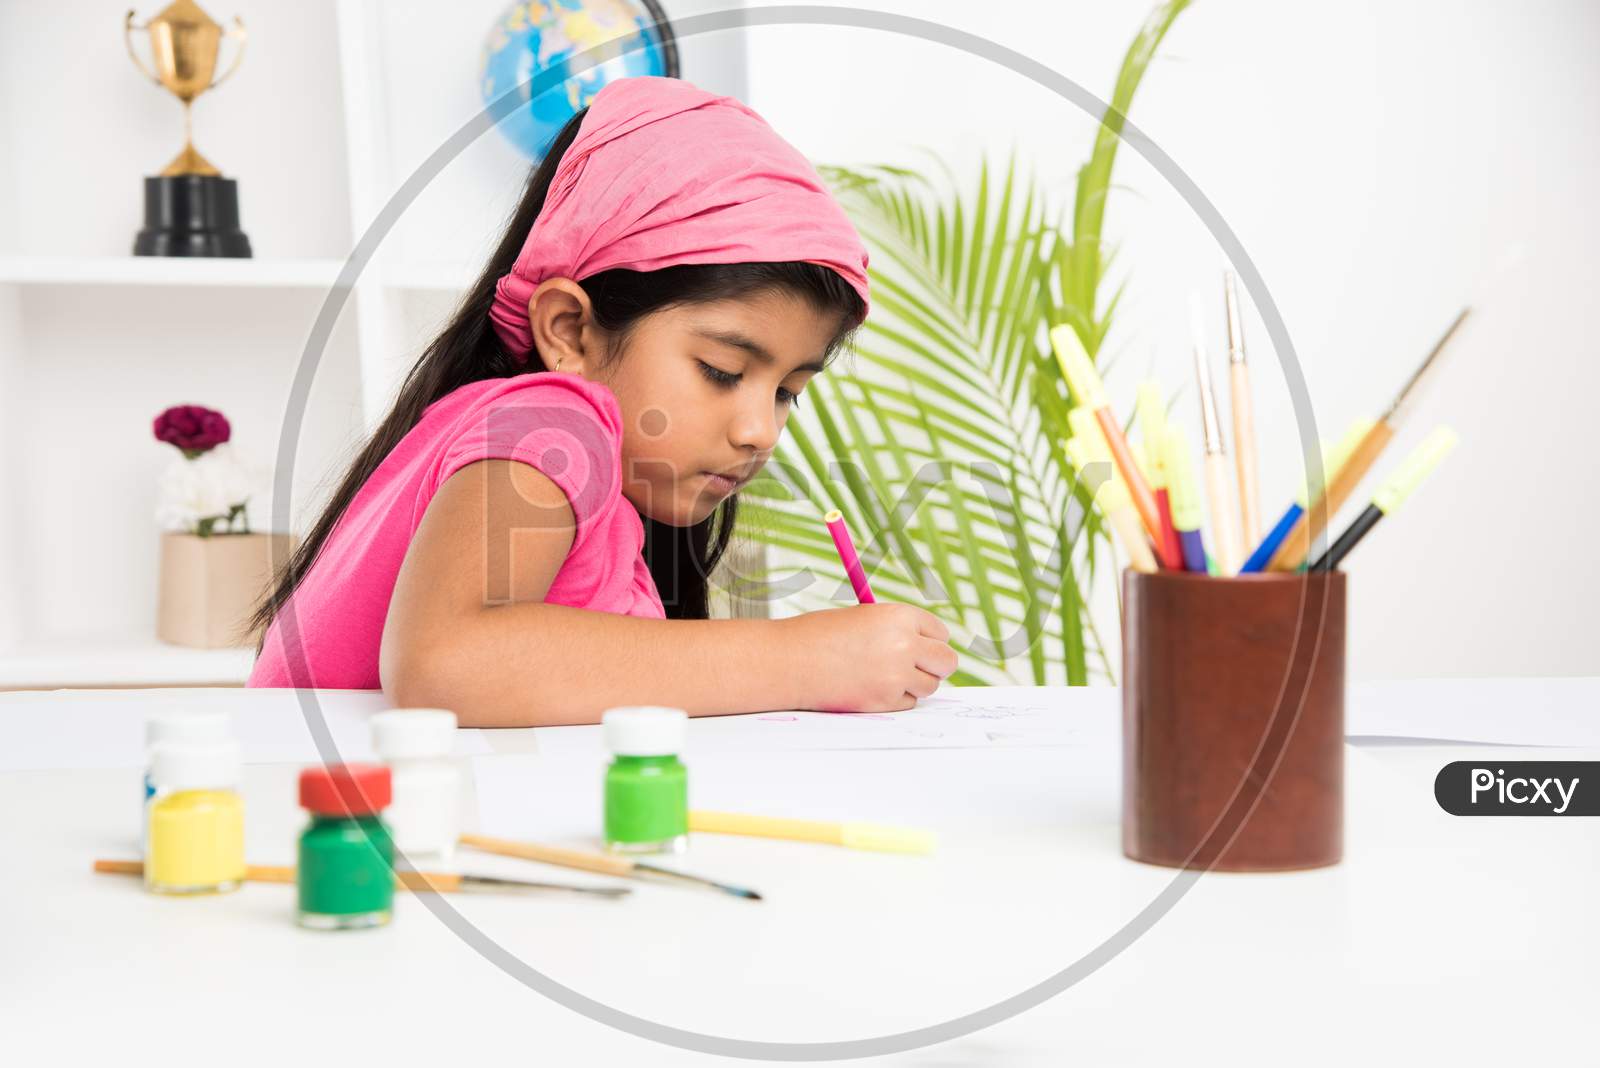 Cute Little Indian/Asian girl child enjoying drawing OR painting with brush and paint over paper at home